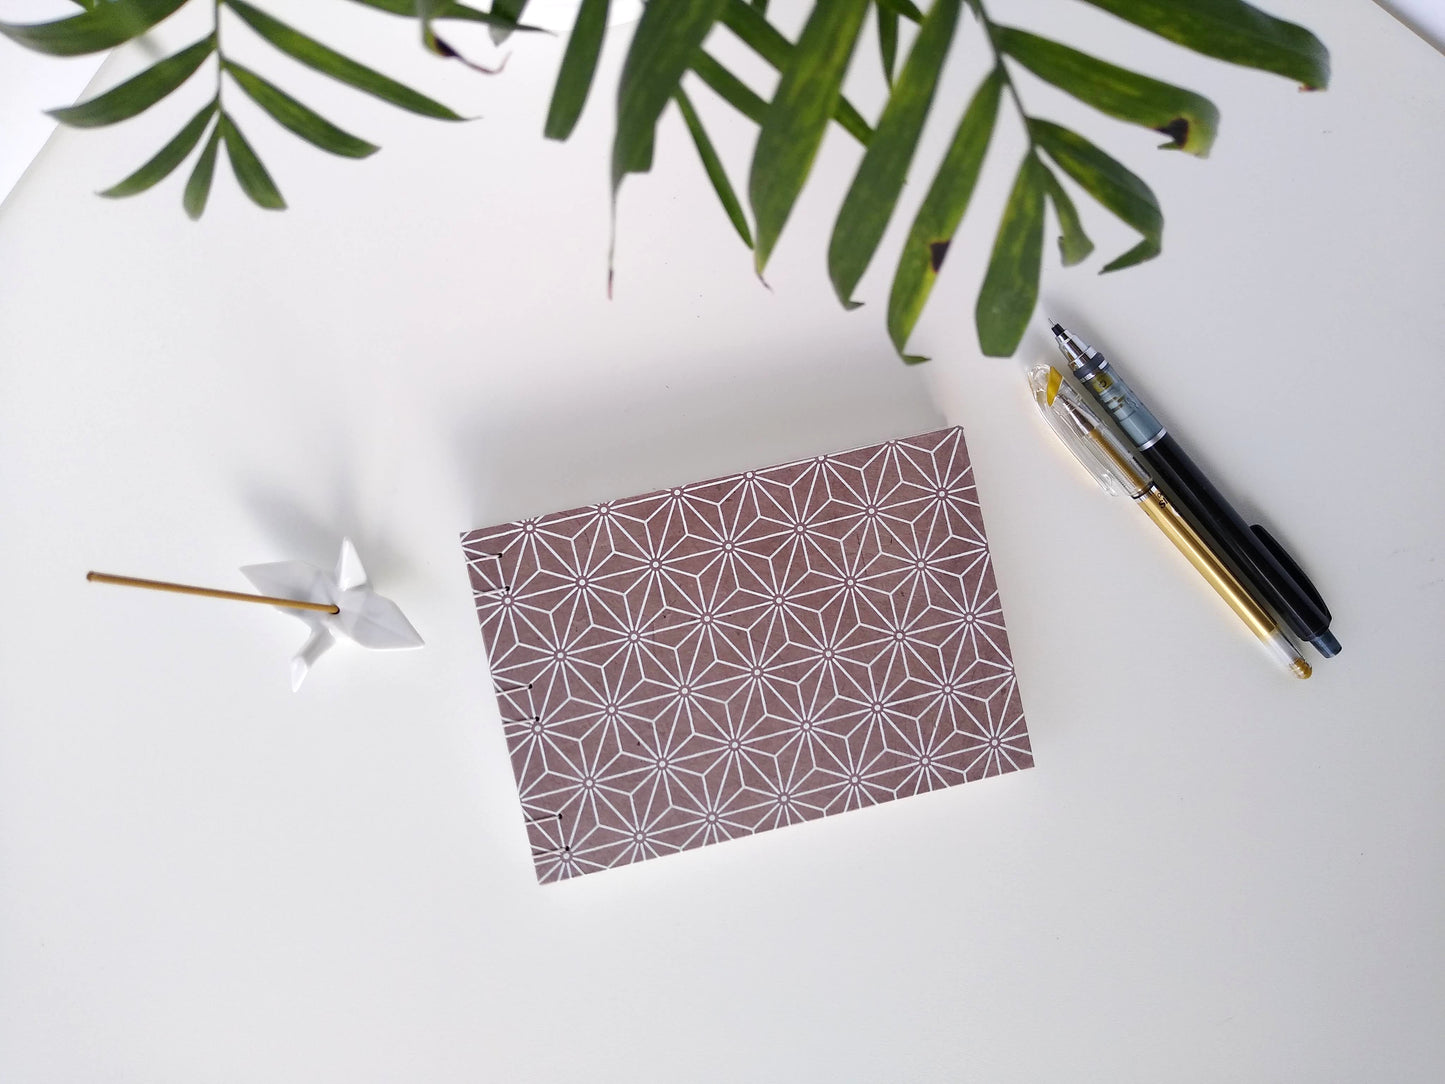 A handmade journal laying on a white desk beside a potted plant, a ceramic crane, a gold pen, and a black mechanical pencil. The cover of the journal is grey with a white asanoha pattern repeated over its entirety.